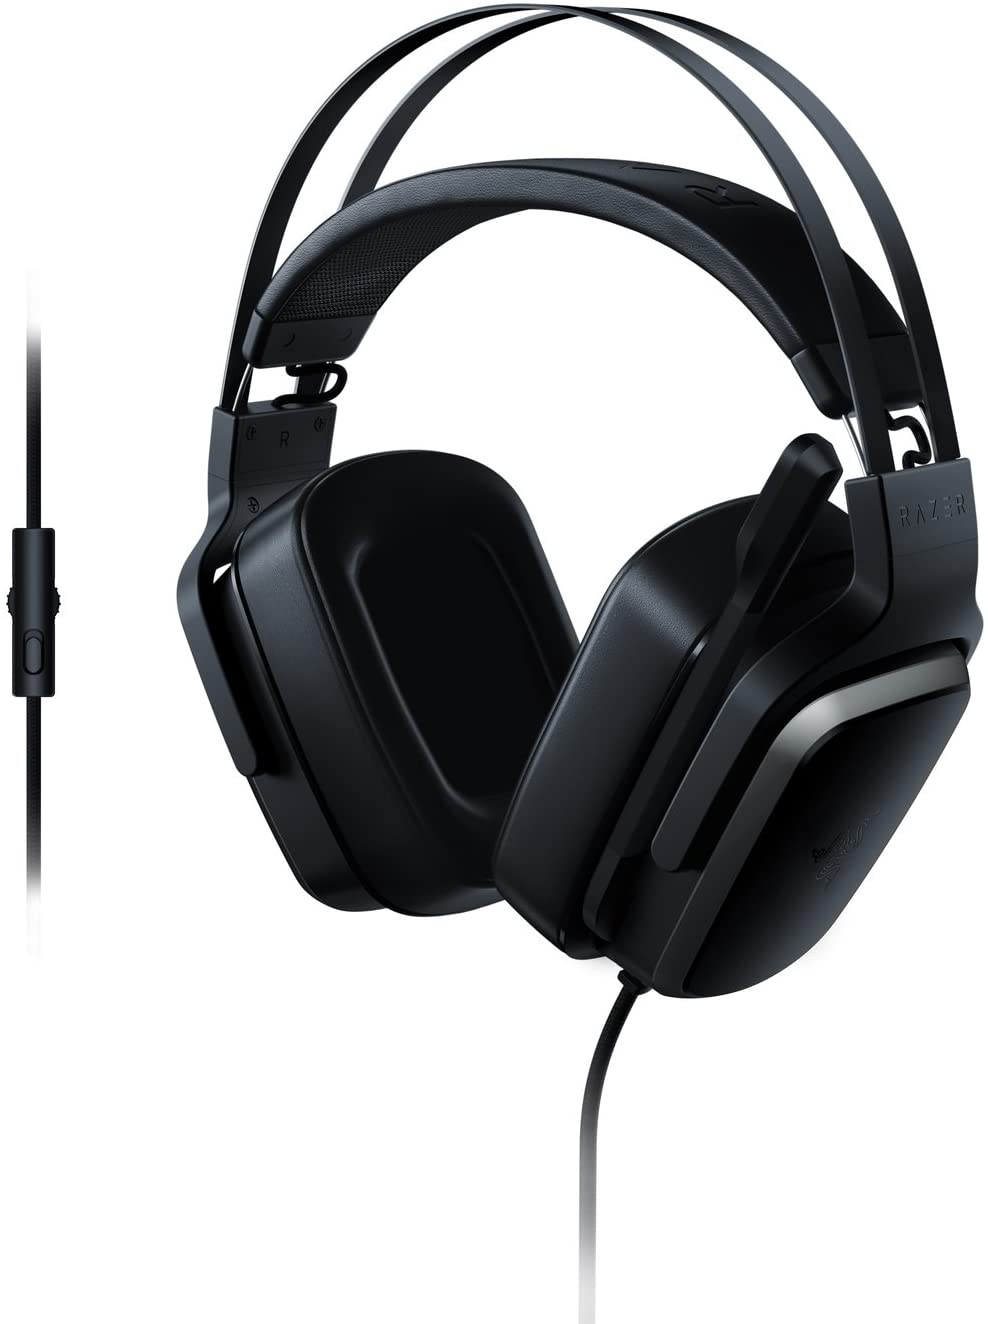 Razer Tiamat 2.2 v2 Gaming Headset: Dual Subwoofers - In-Line Audio Control - Rotatable Boom Mic - W